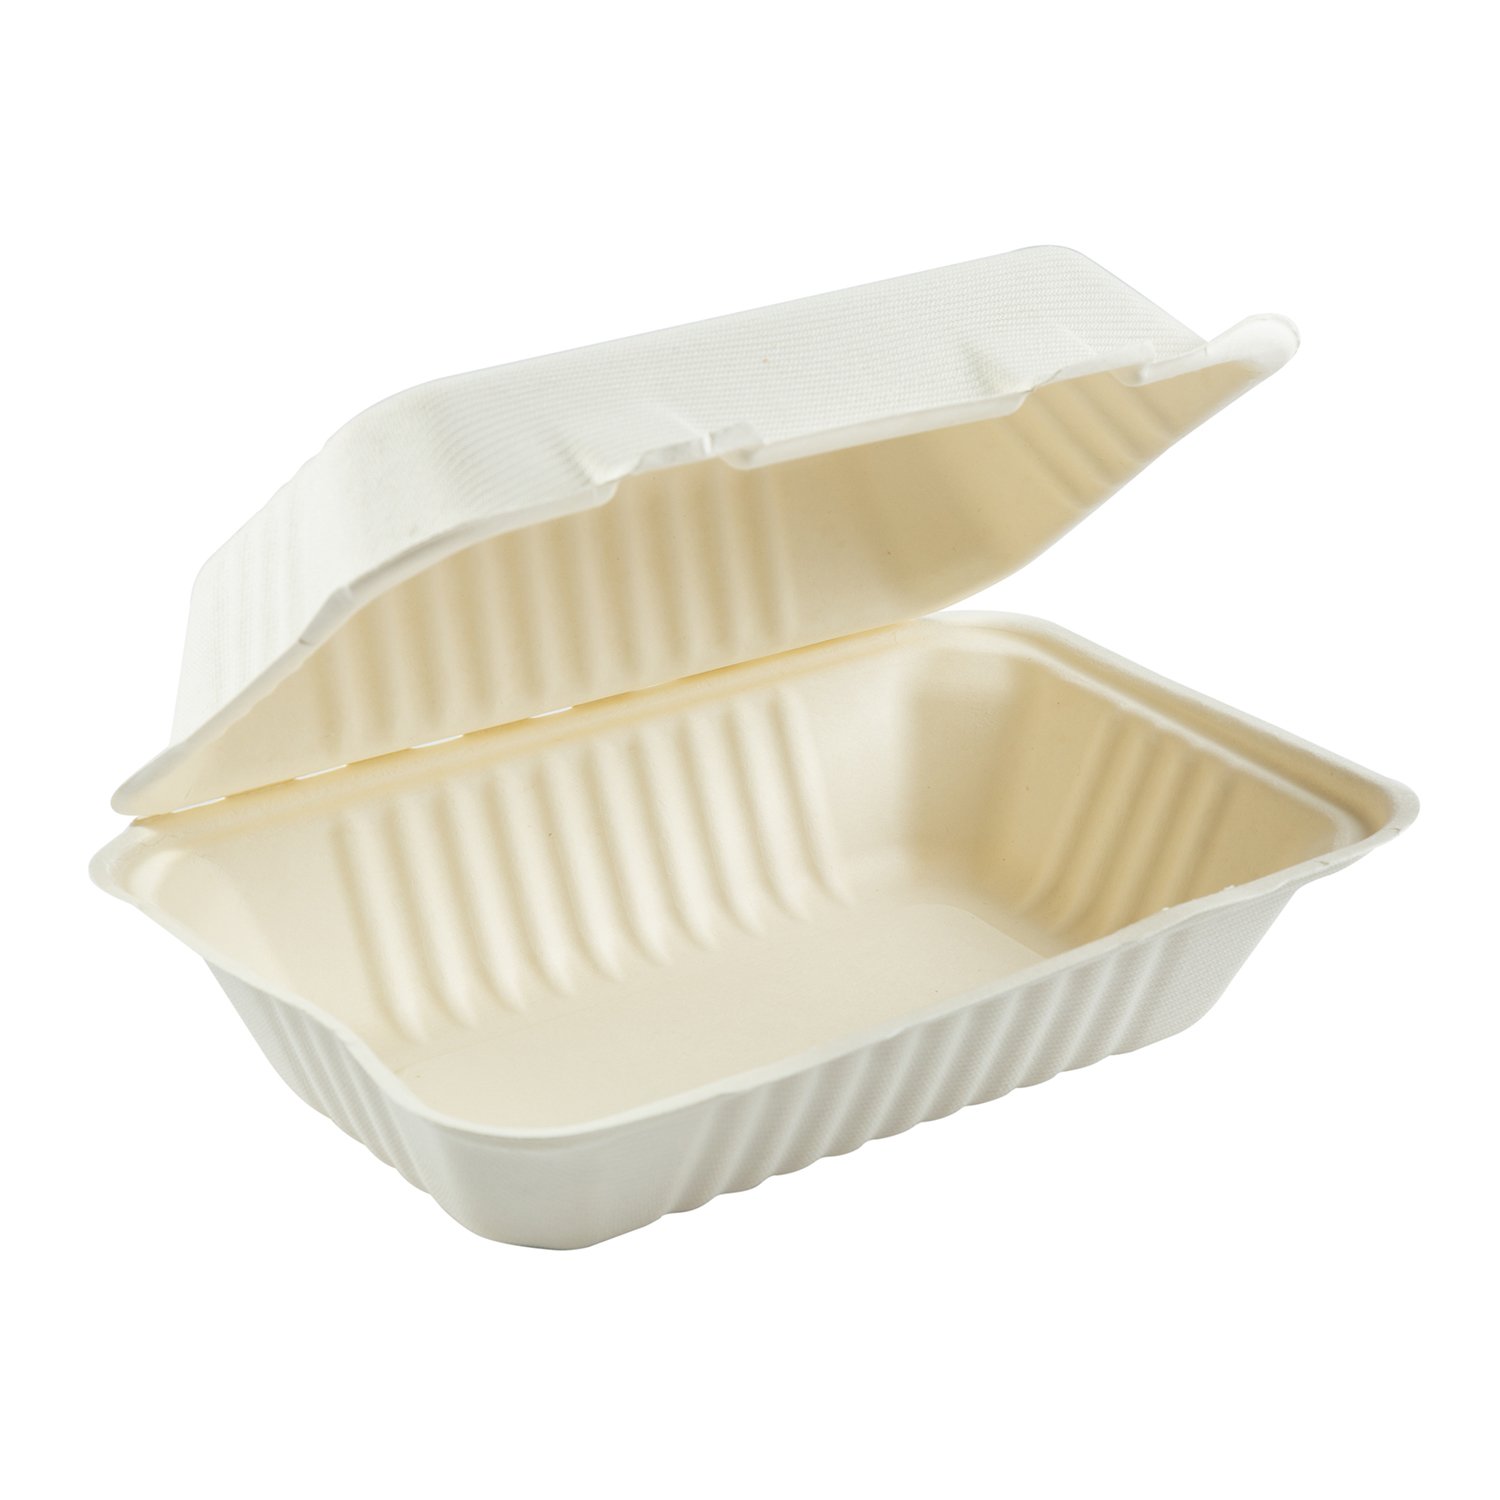 3 Compartment Meal Tray with Lid, Eco Friendly, Biodegradable & Disposable  Compartment Meal Tray with Smart Lock